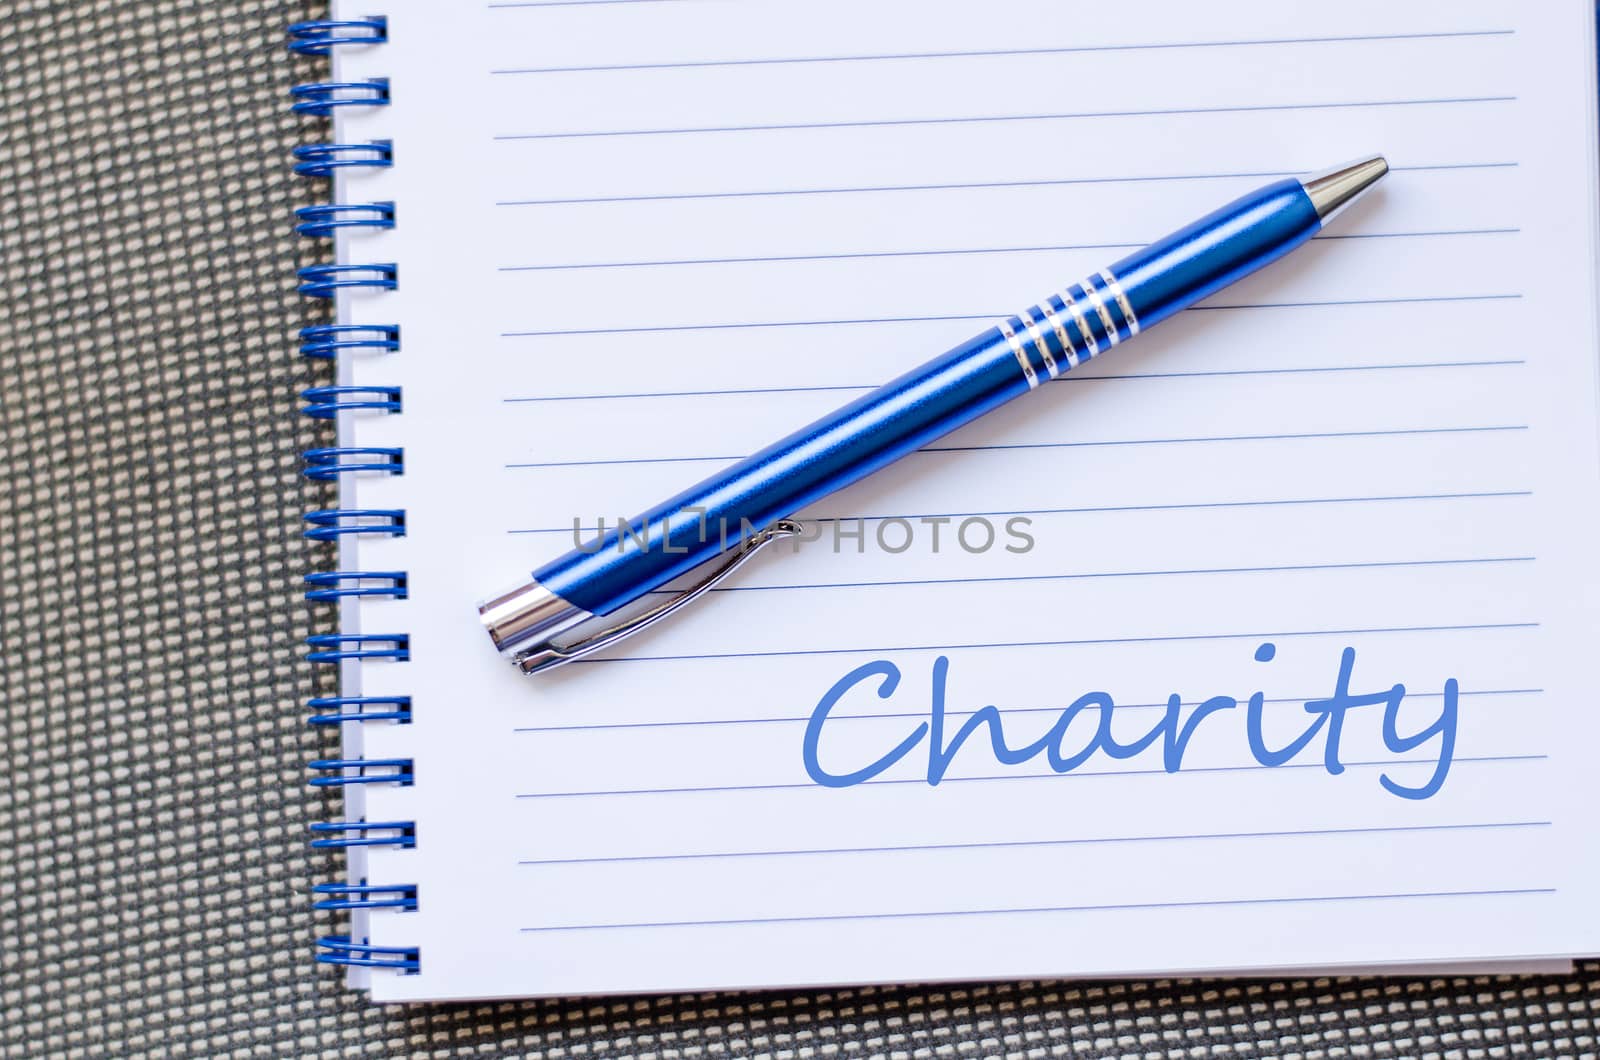 Charity write on notebook by eenevski